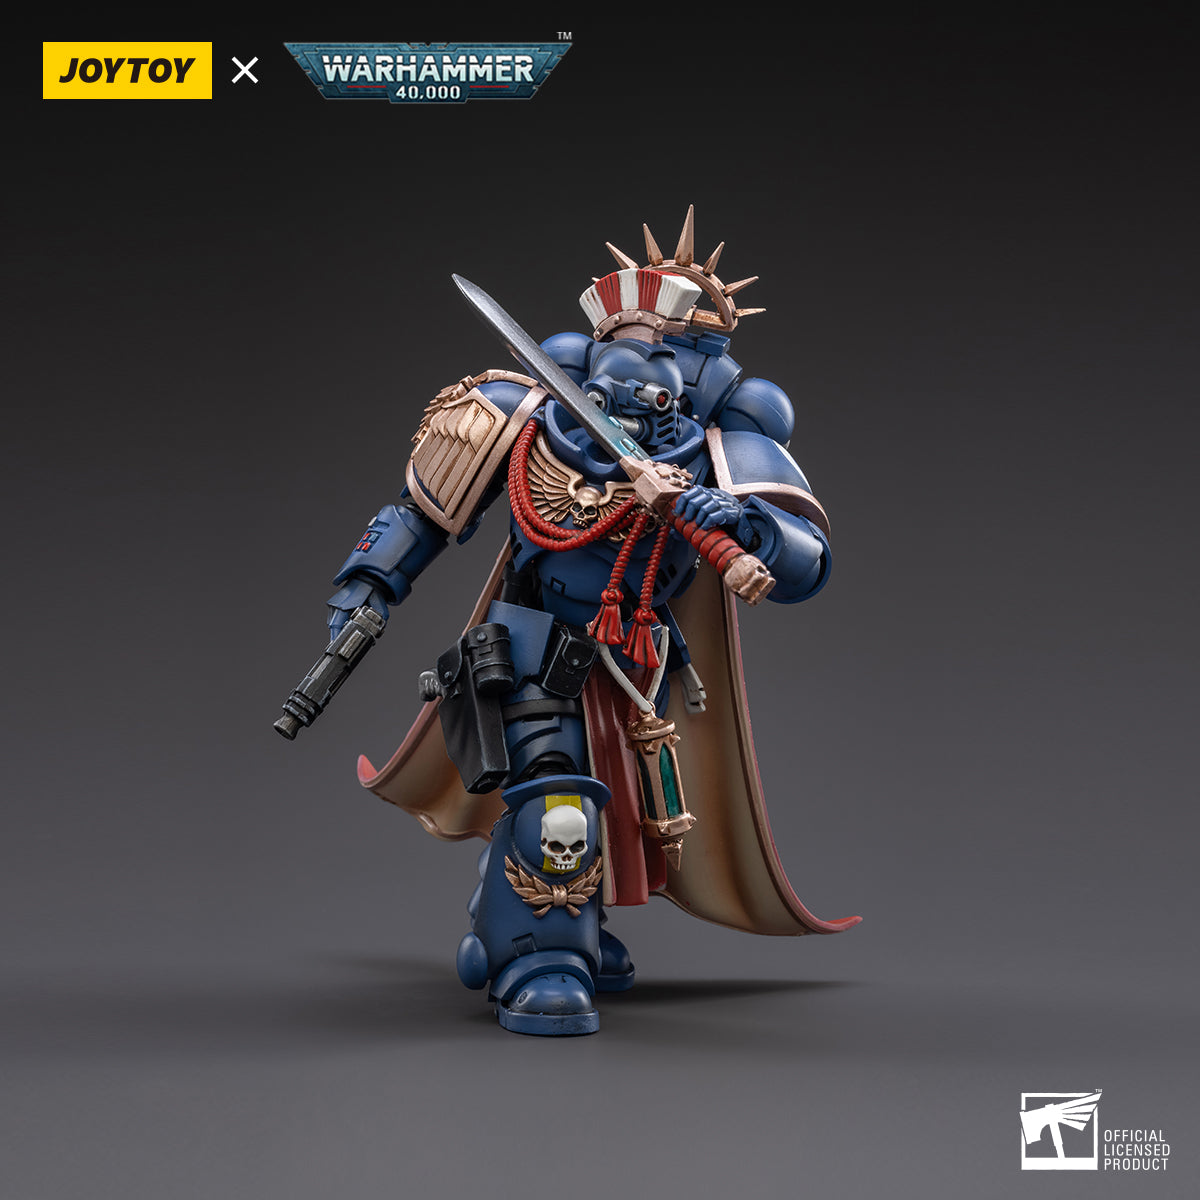 Warhammer Collectibles: 1/18 Scale Ultramarines Primaris Captain Sidonicus